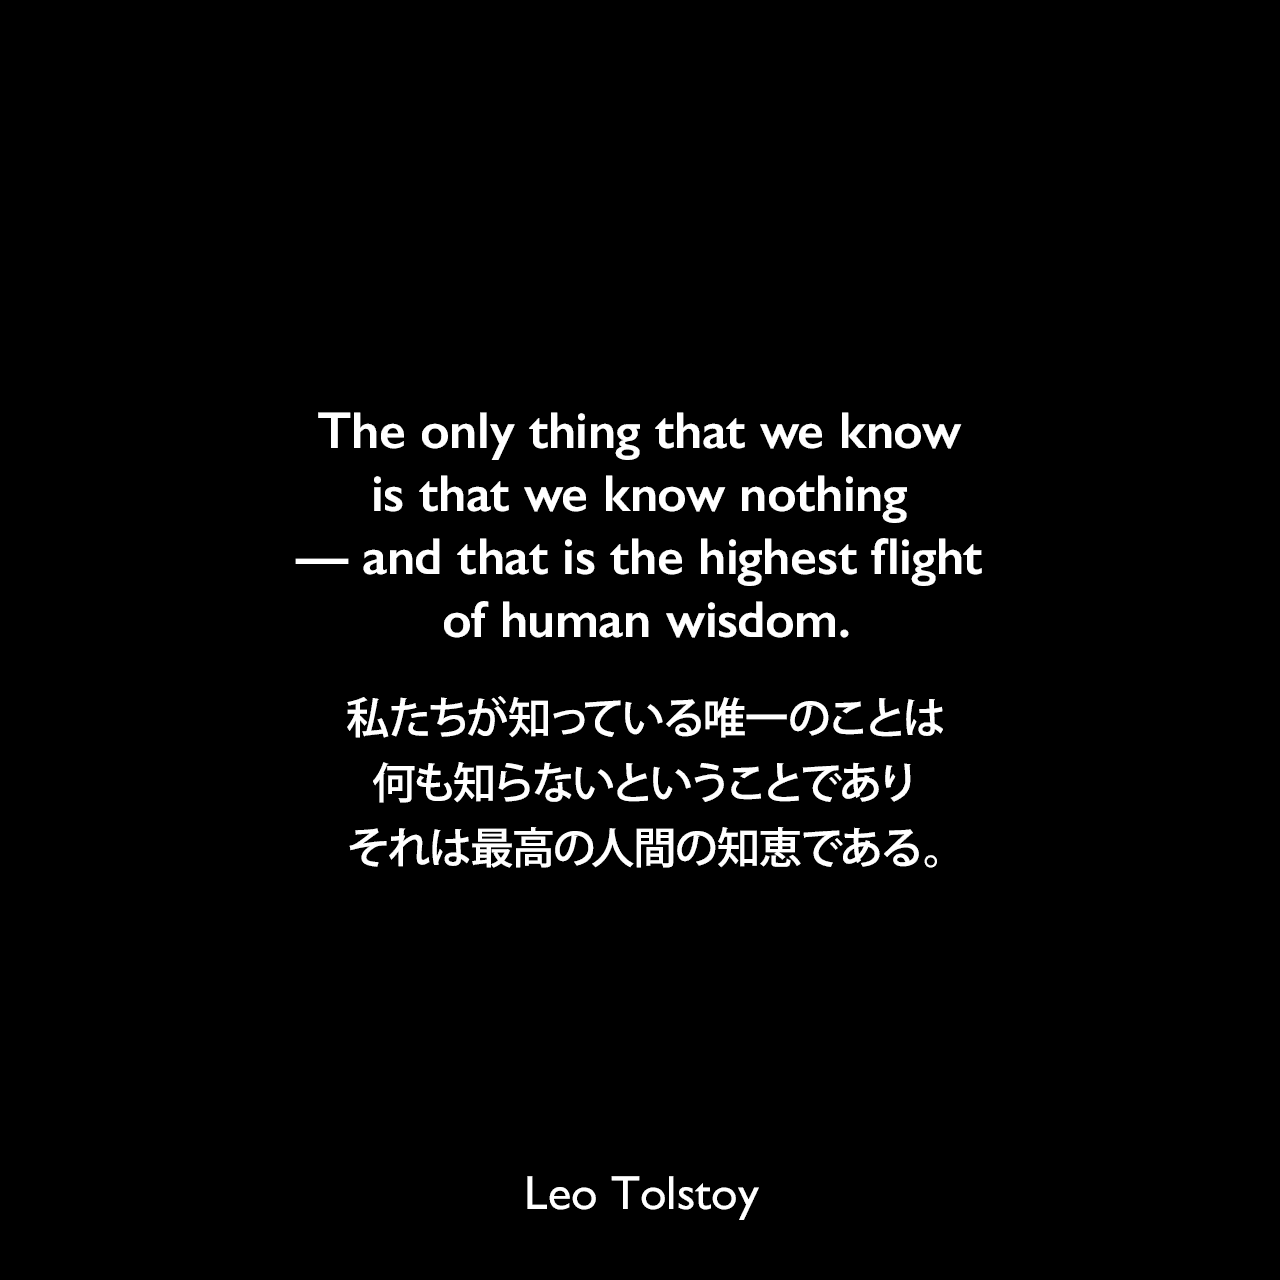 The only thing that we know is that we know nothing — and that is the highest flight of human wisdom.私たちが知っている唯一のことは、何も知らないということであり、それは最高の人間の知恵である。- トルストイによる小説「戦争と平和」より